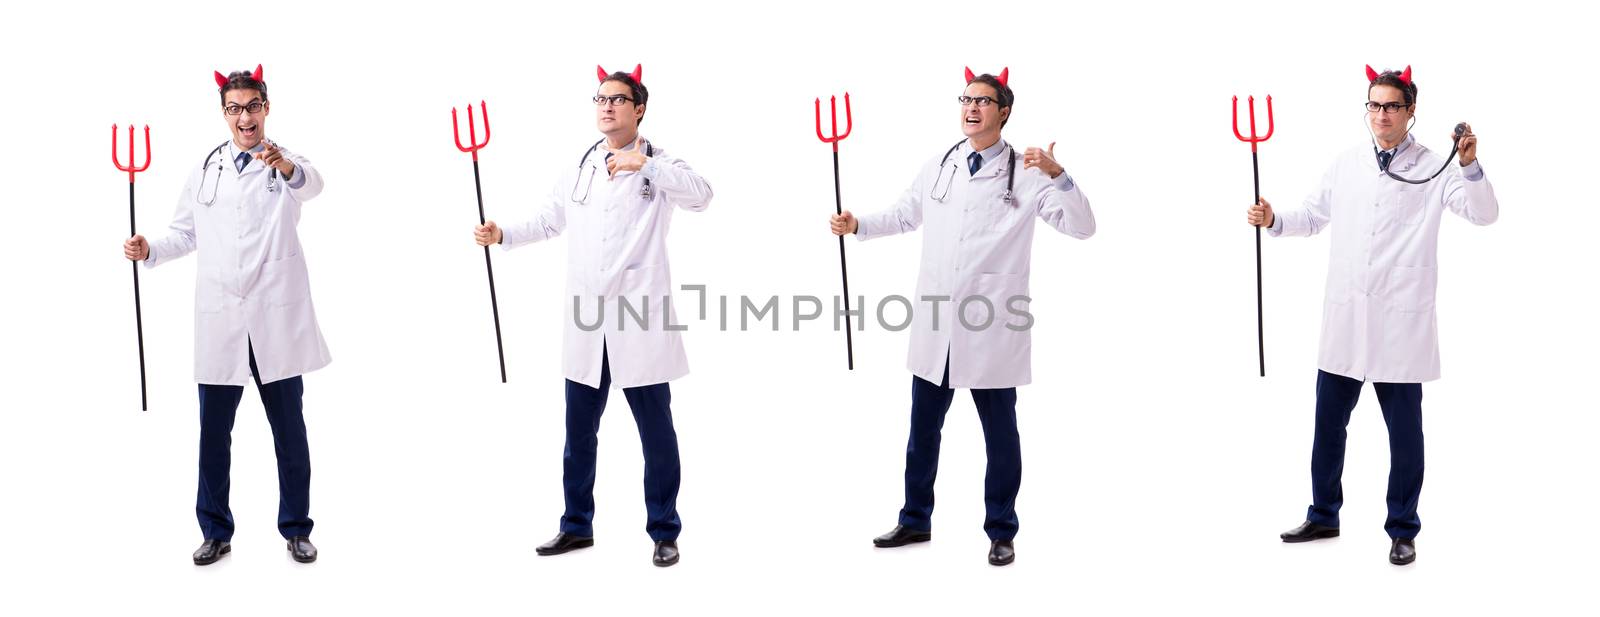 Devil doctor in funny medical concept isolated on white background